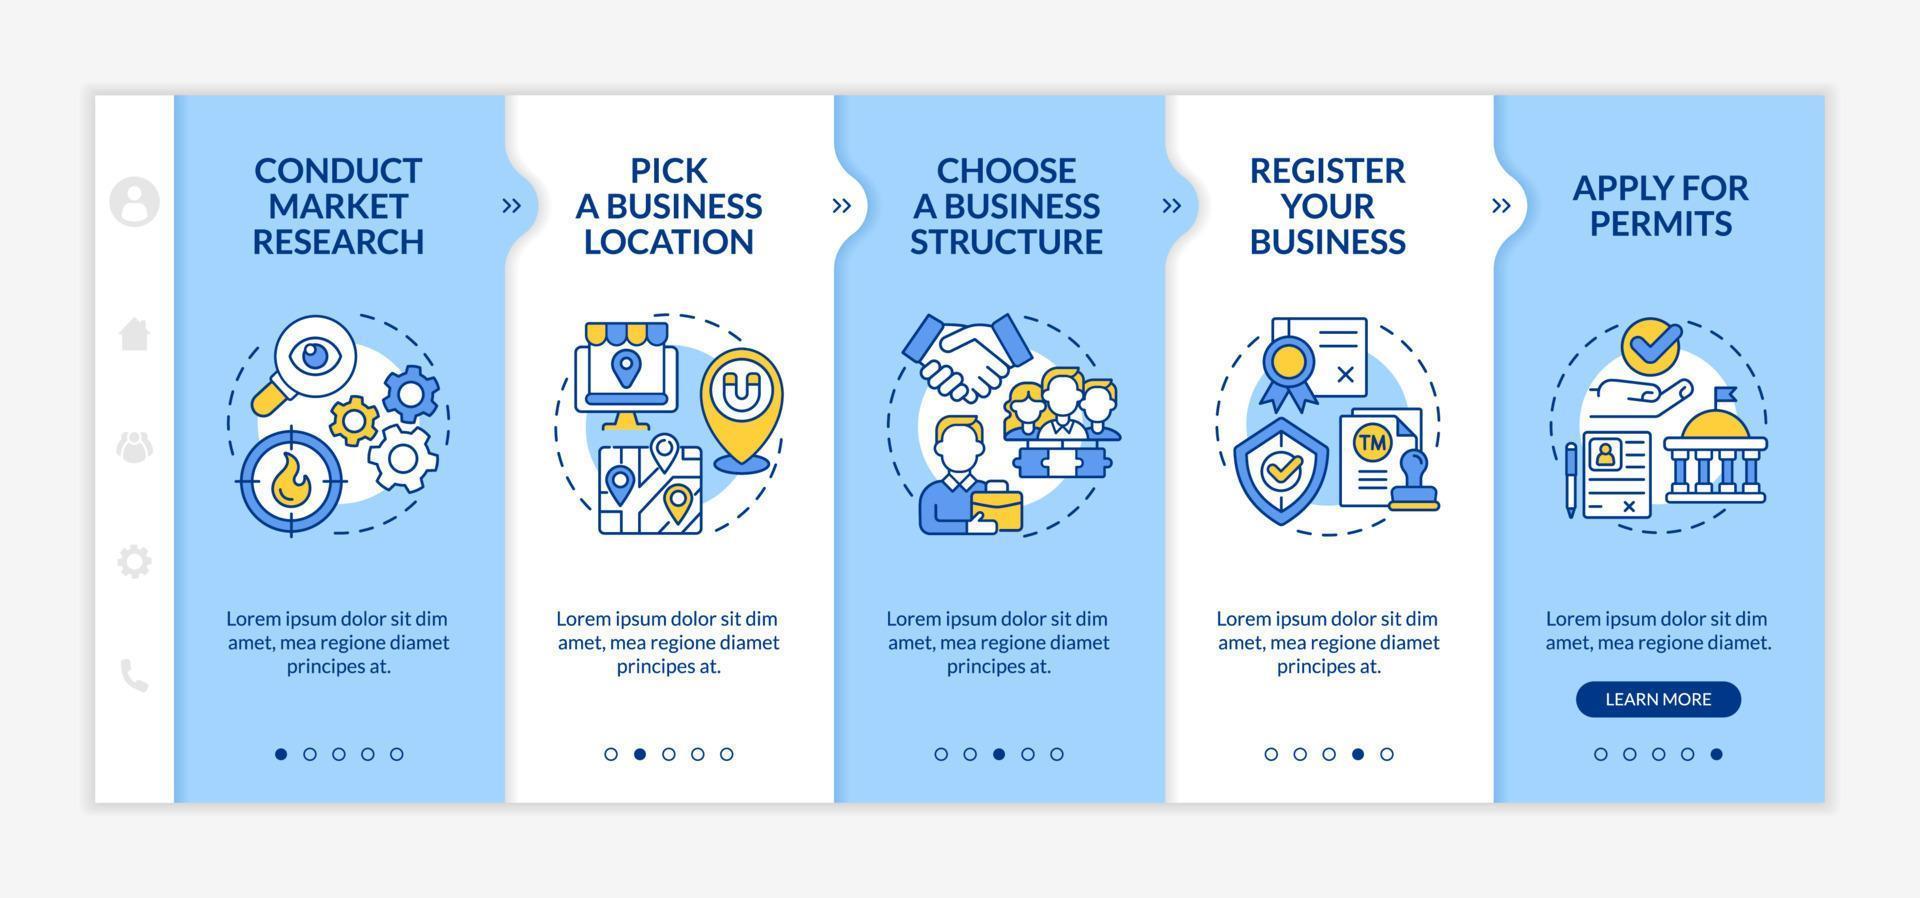 Startup boosting tips onboarding vector template. Apply for permits. Responsive mobile website with icons. Web page walkthrough 5 step screens. Small business color concept with linear illustrations